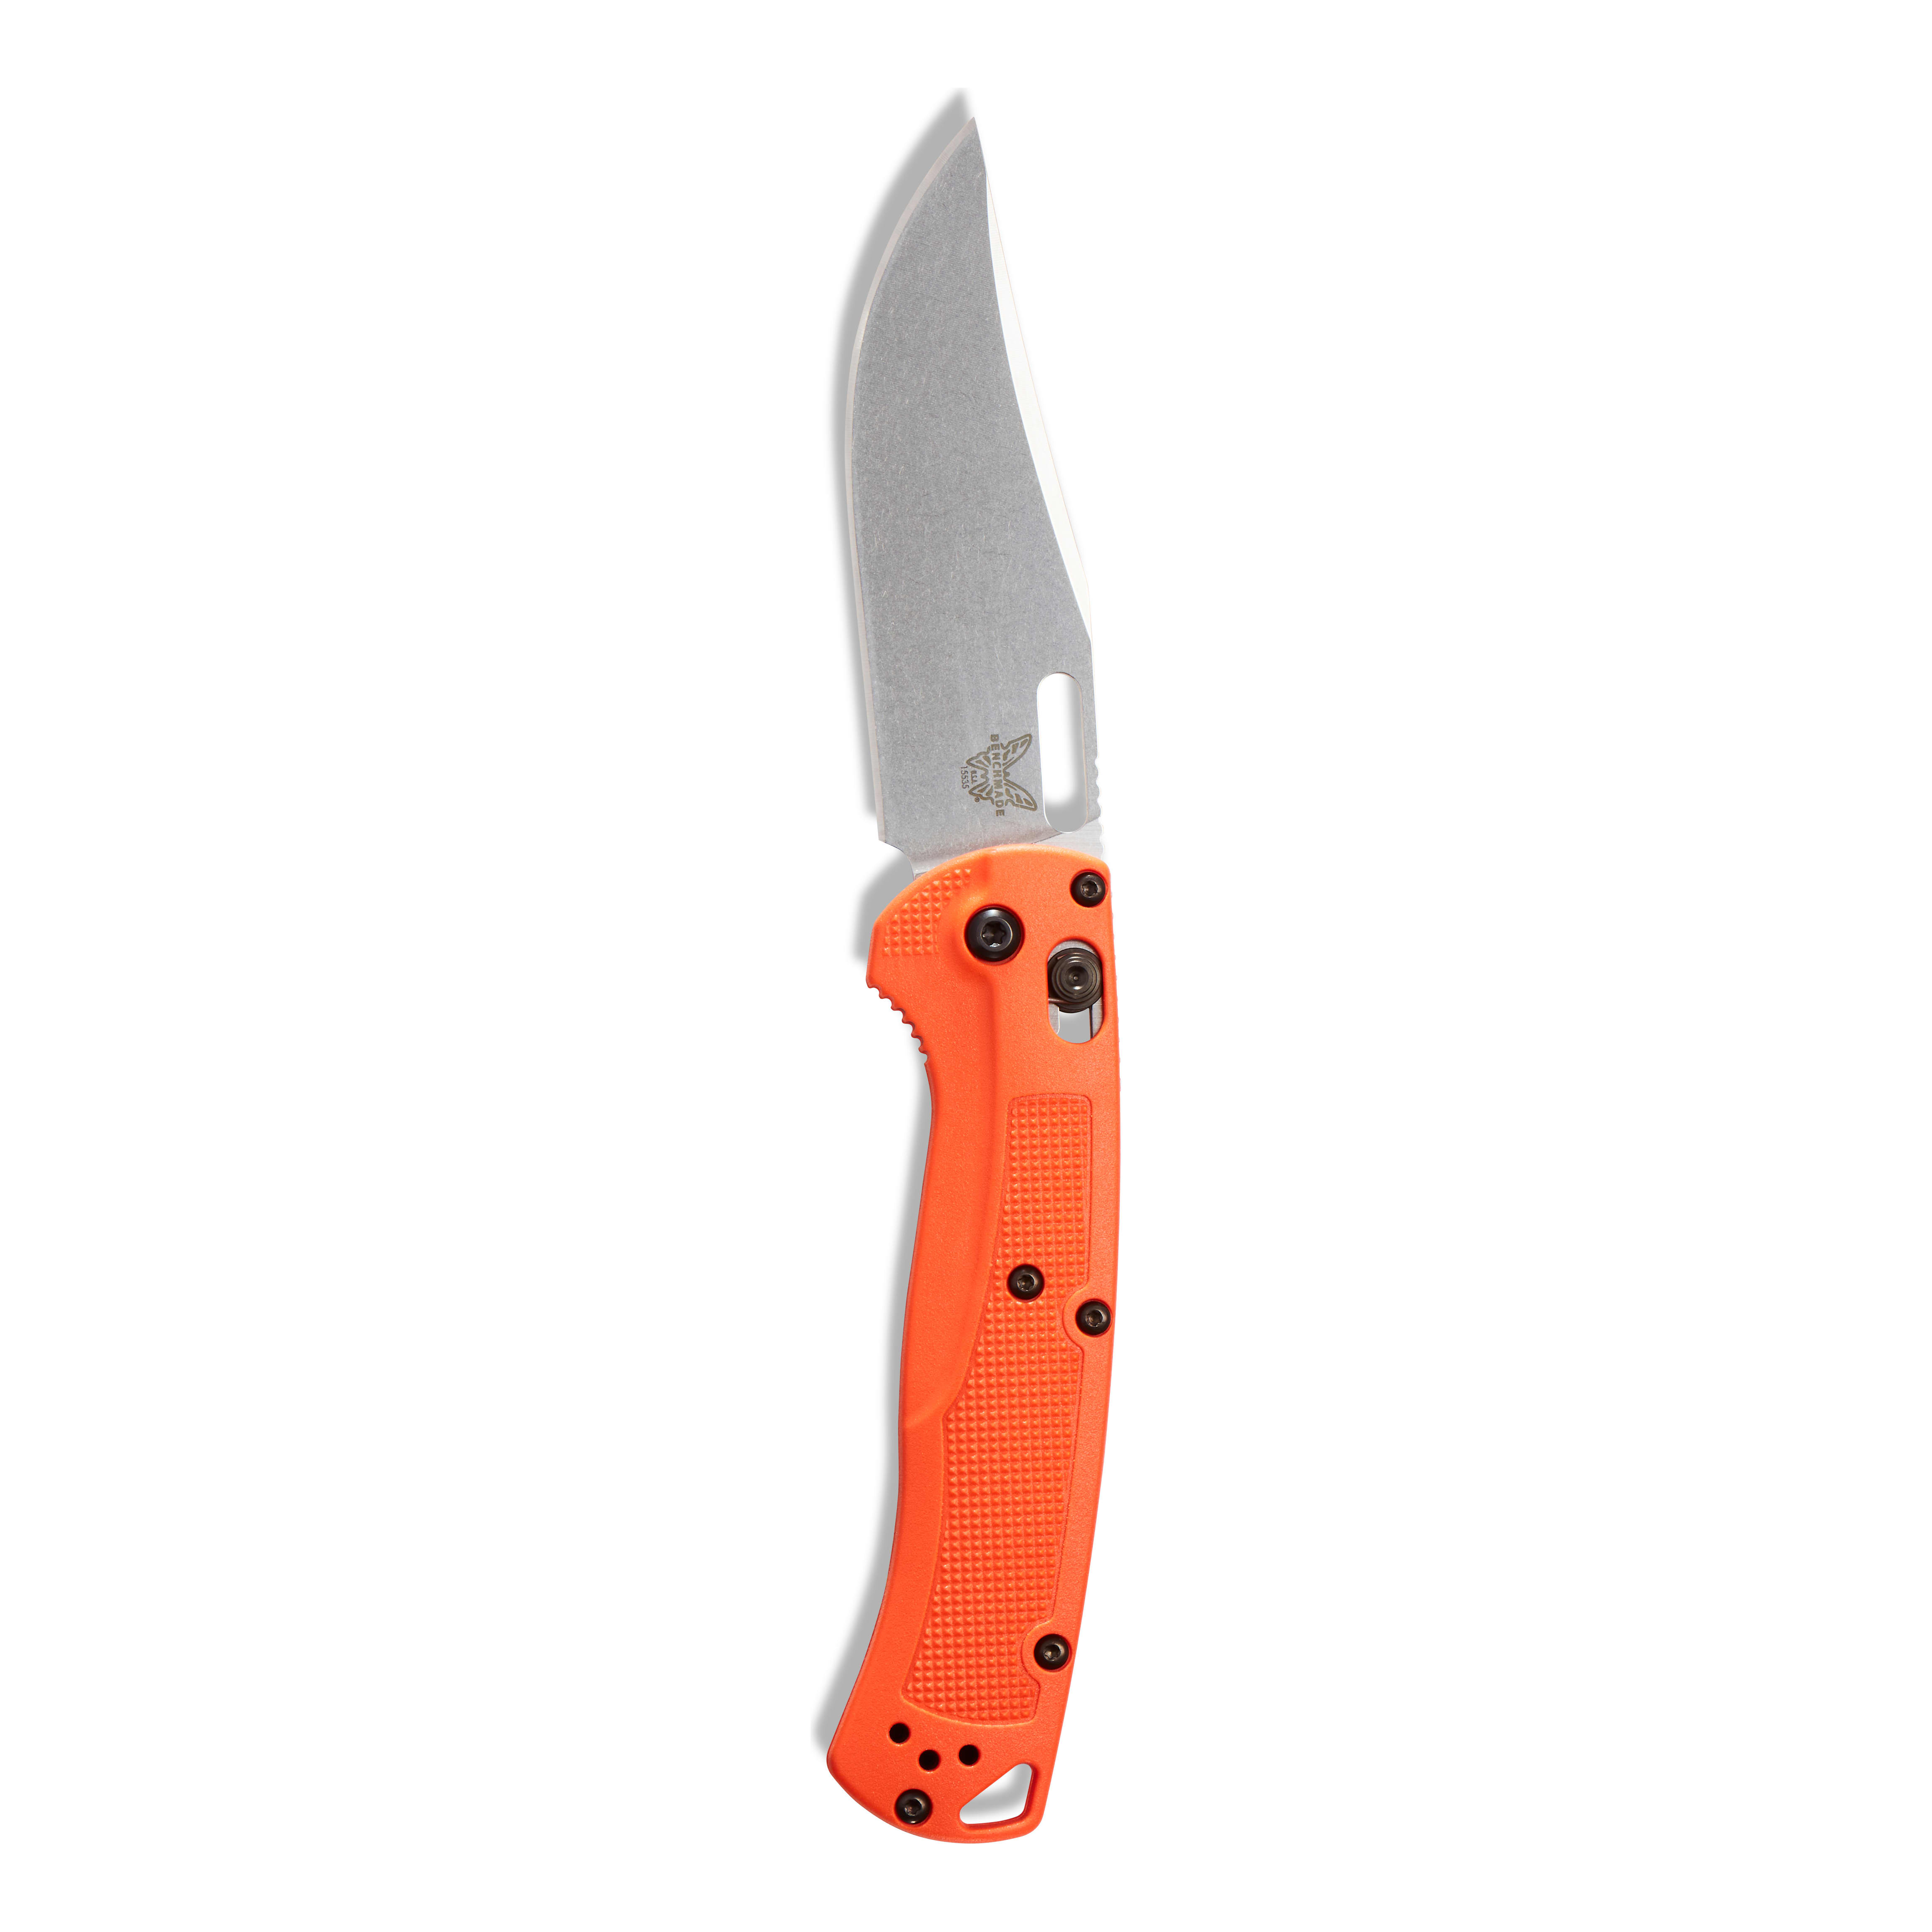 Benchmade® Taggedout™ Folding Knife